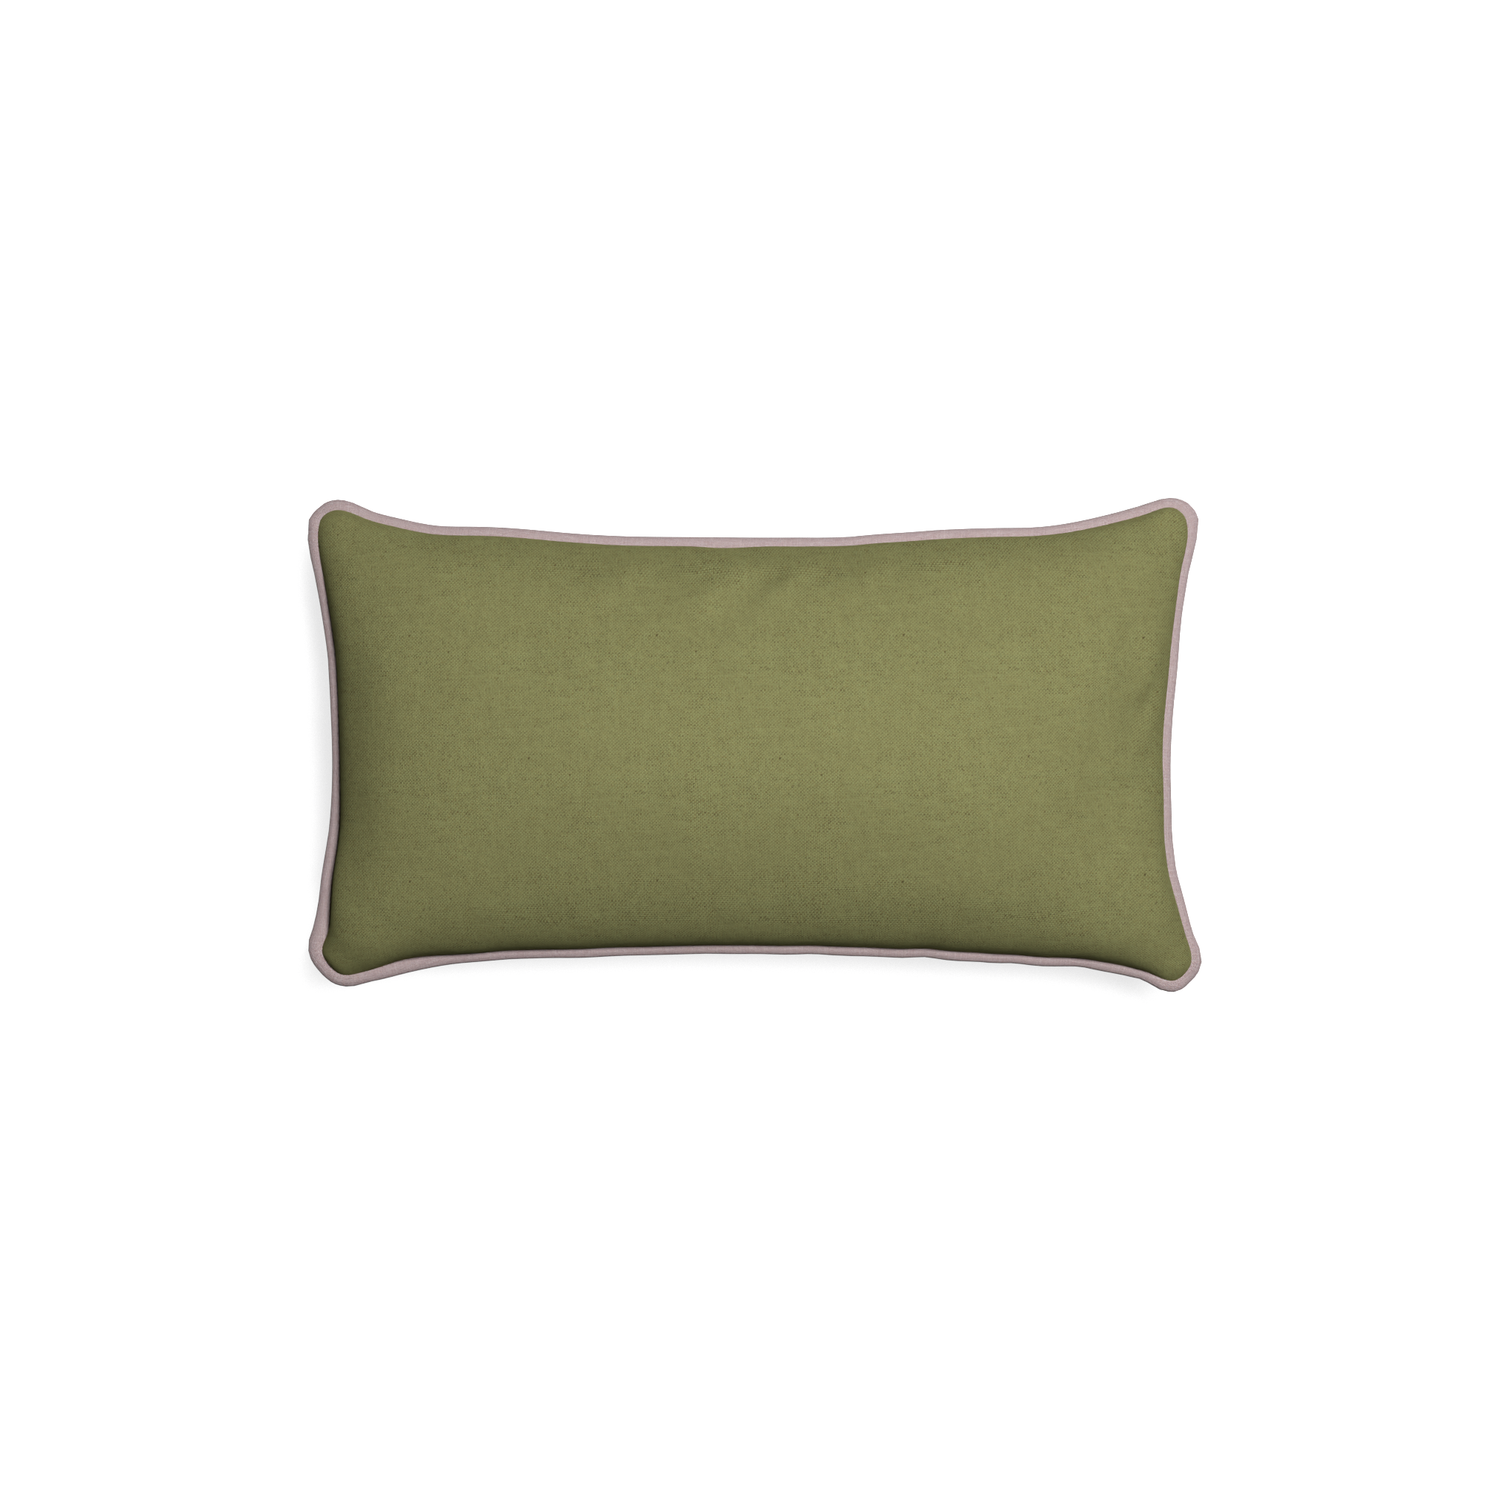 Petite-lumbar moss custom moss greenpillow with orchid piping on white background